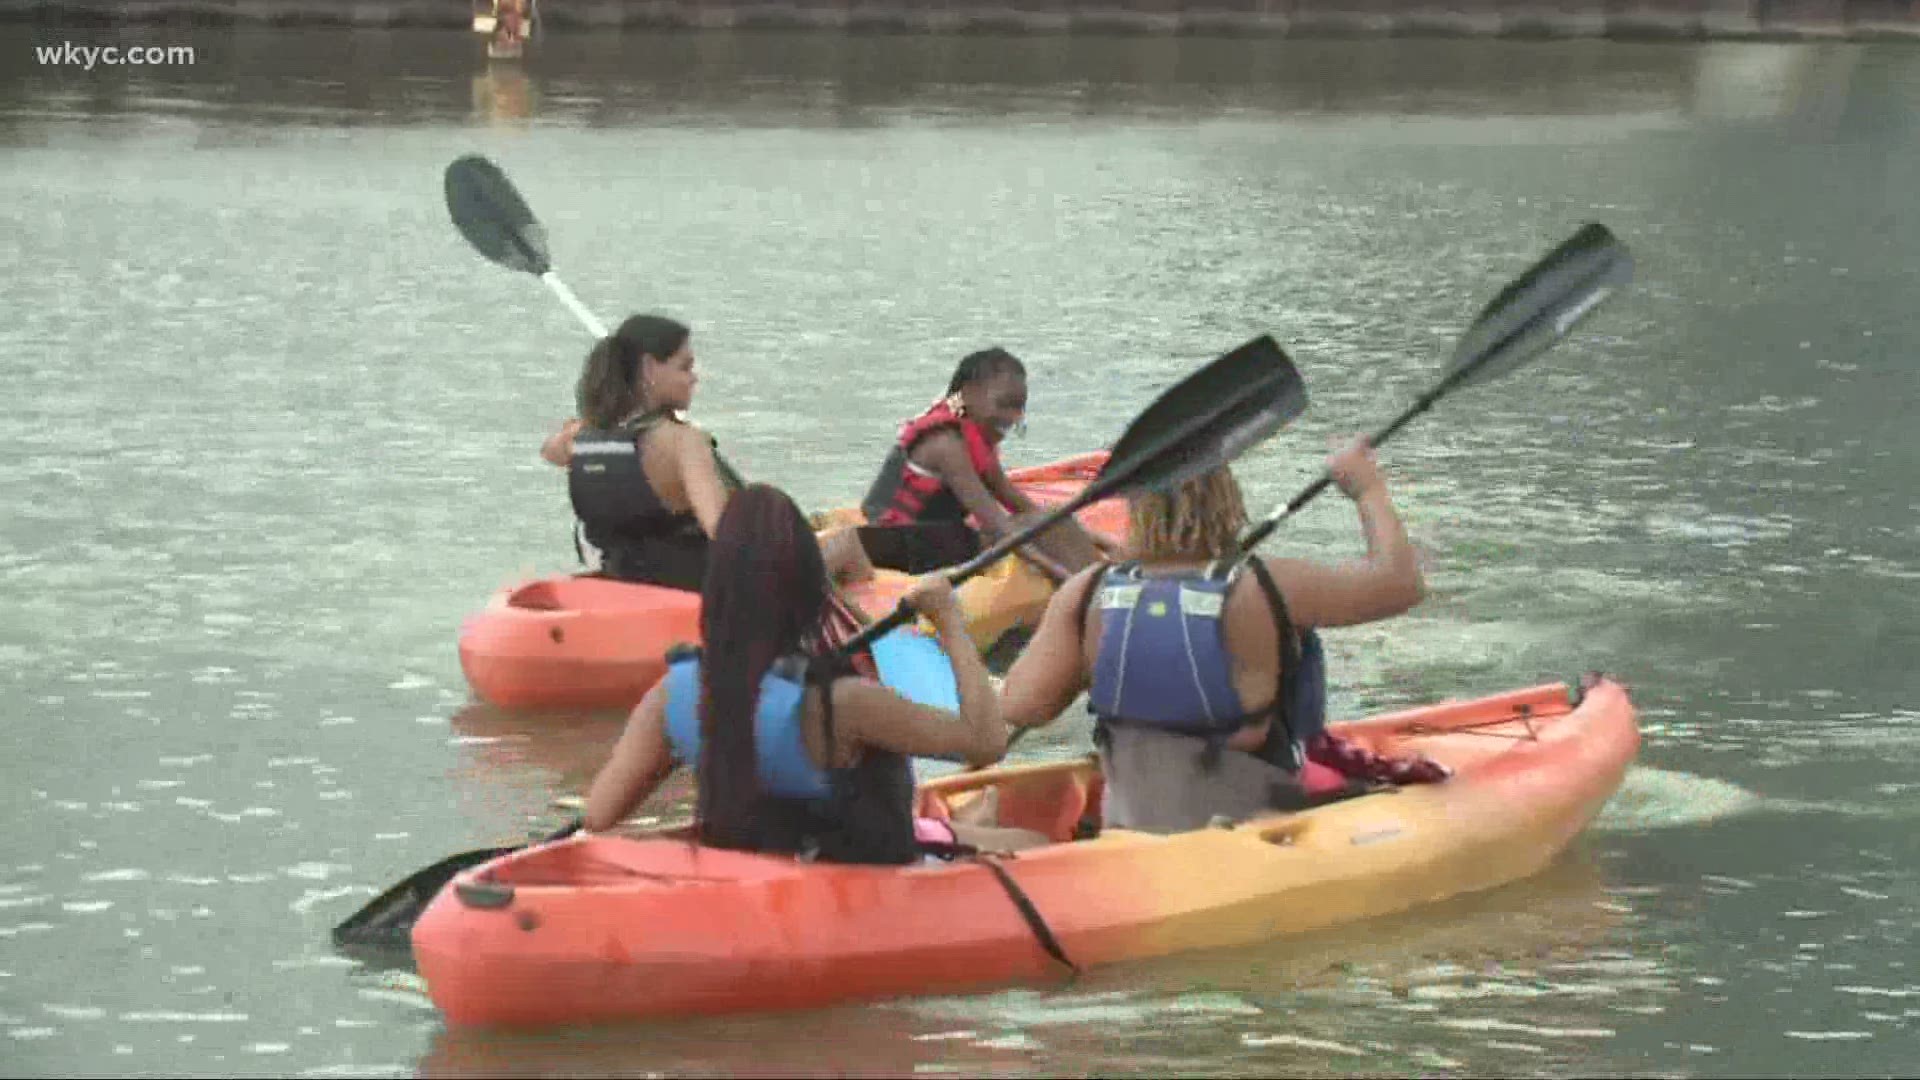 Looking for something fun to do? Get out and enjoy the beauty of Lake Erie with Great Lakes Watersports. Here's how they're keeping guests safe amid coronavirus.